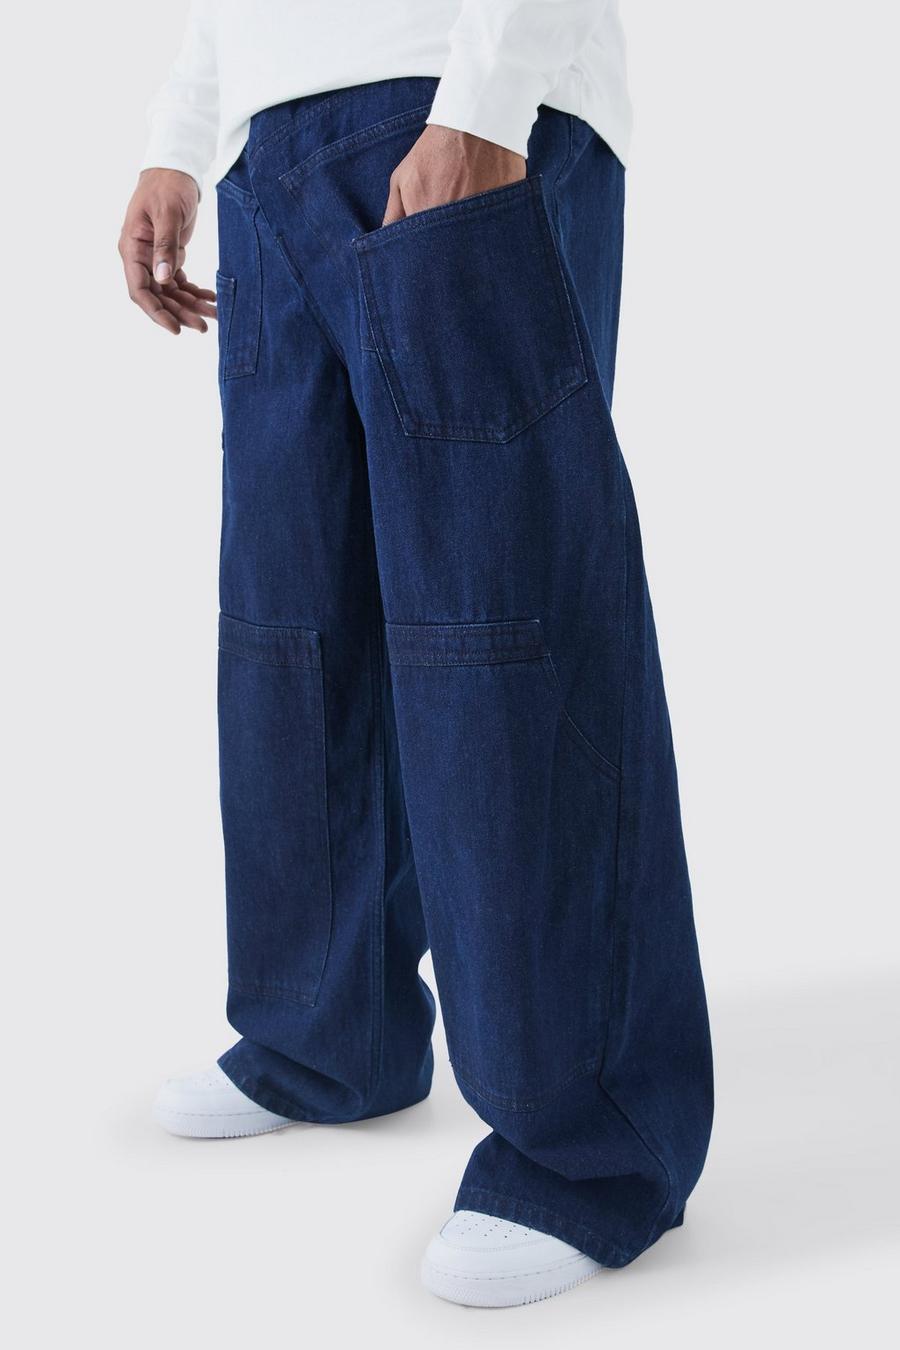 Grande taille - Jean charpentier baggy à poches multiples, Indigo